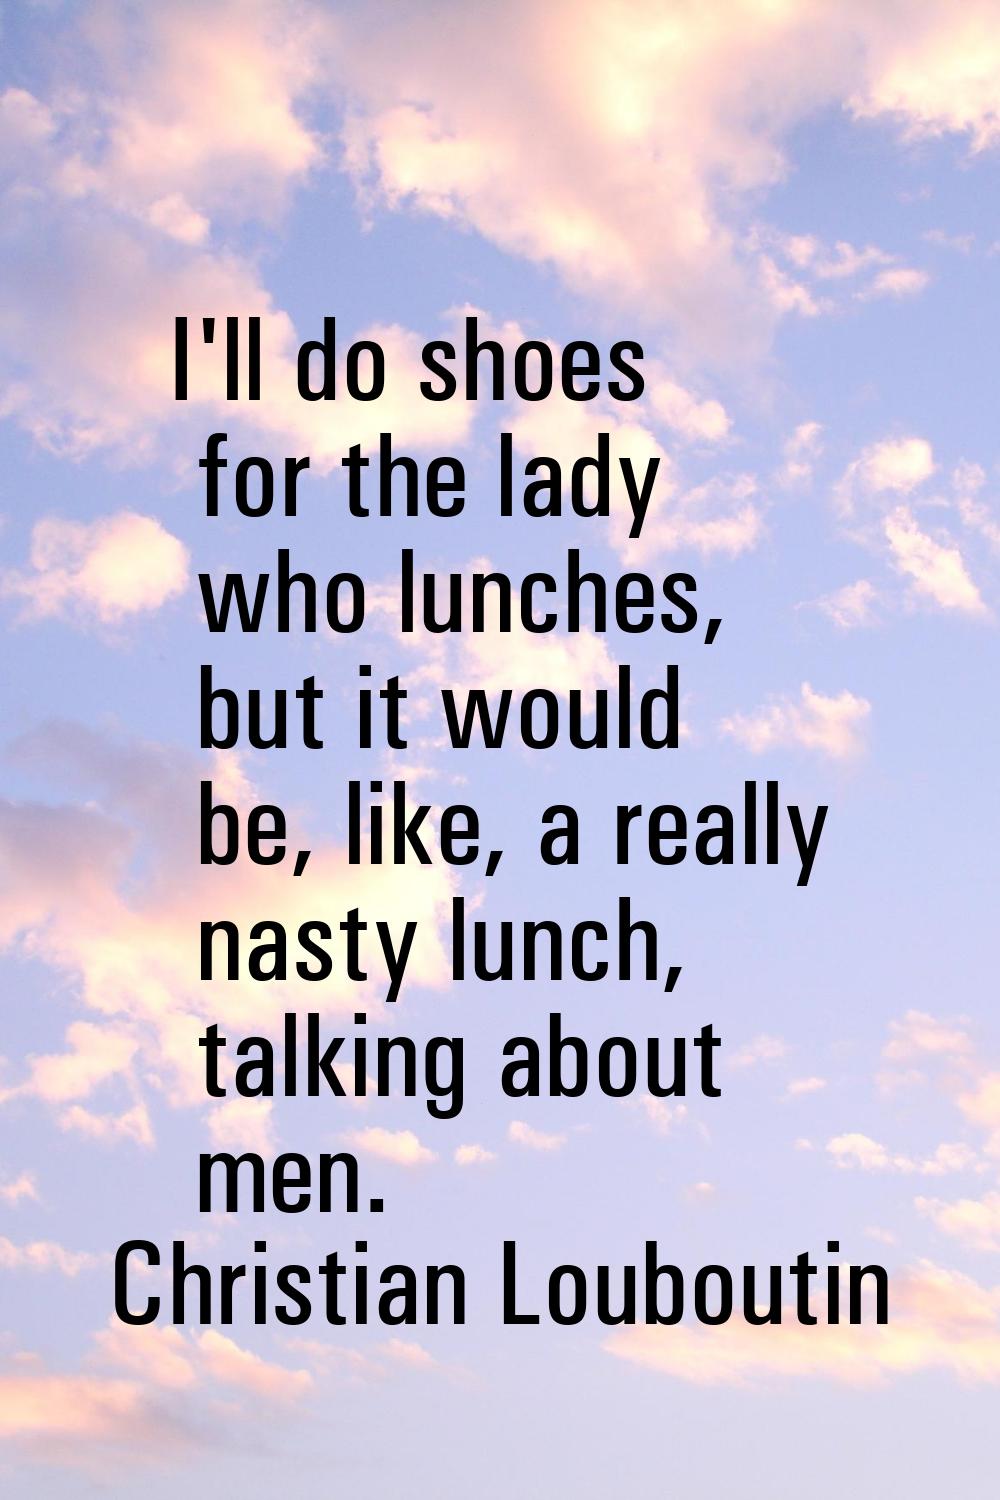 I'll do shoes for the lady who lunches, but it would be, like, a really nasty lunch, talking about 